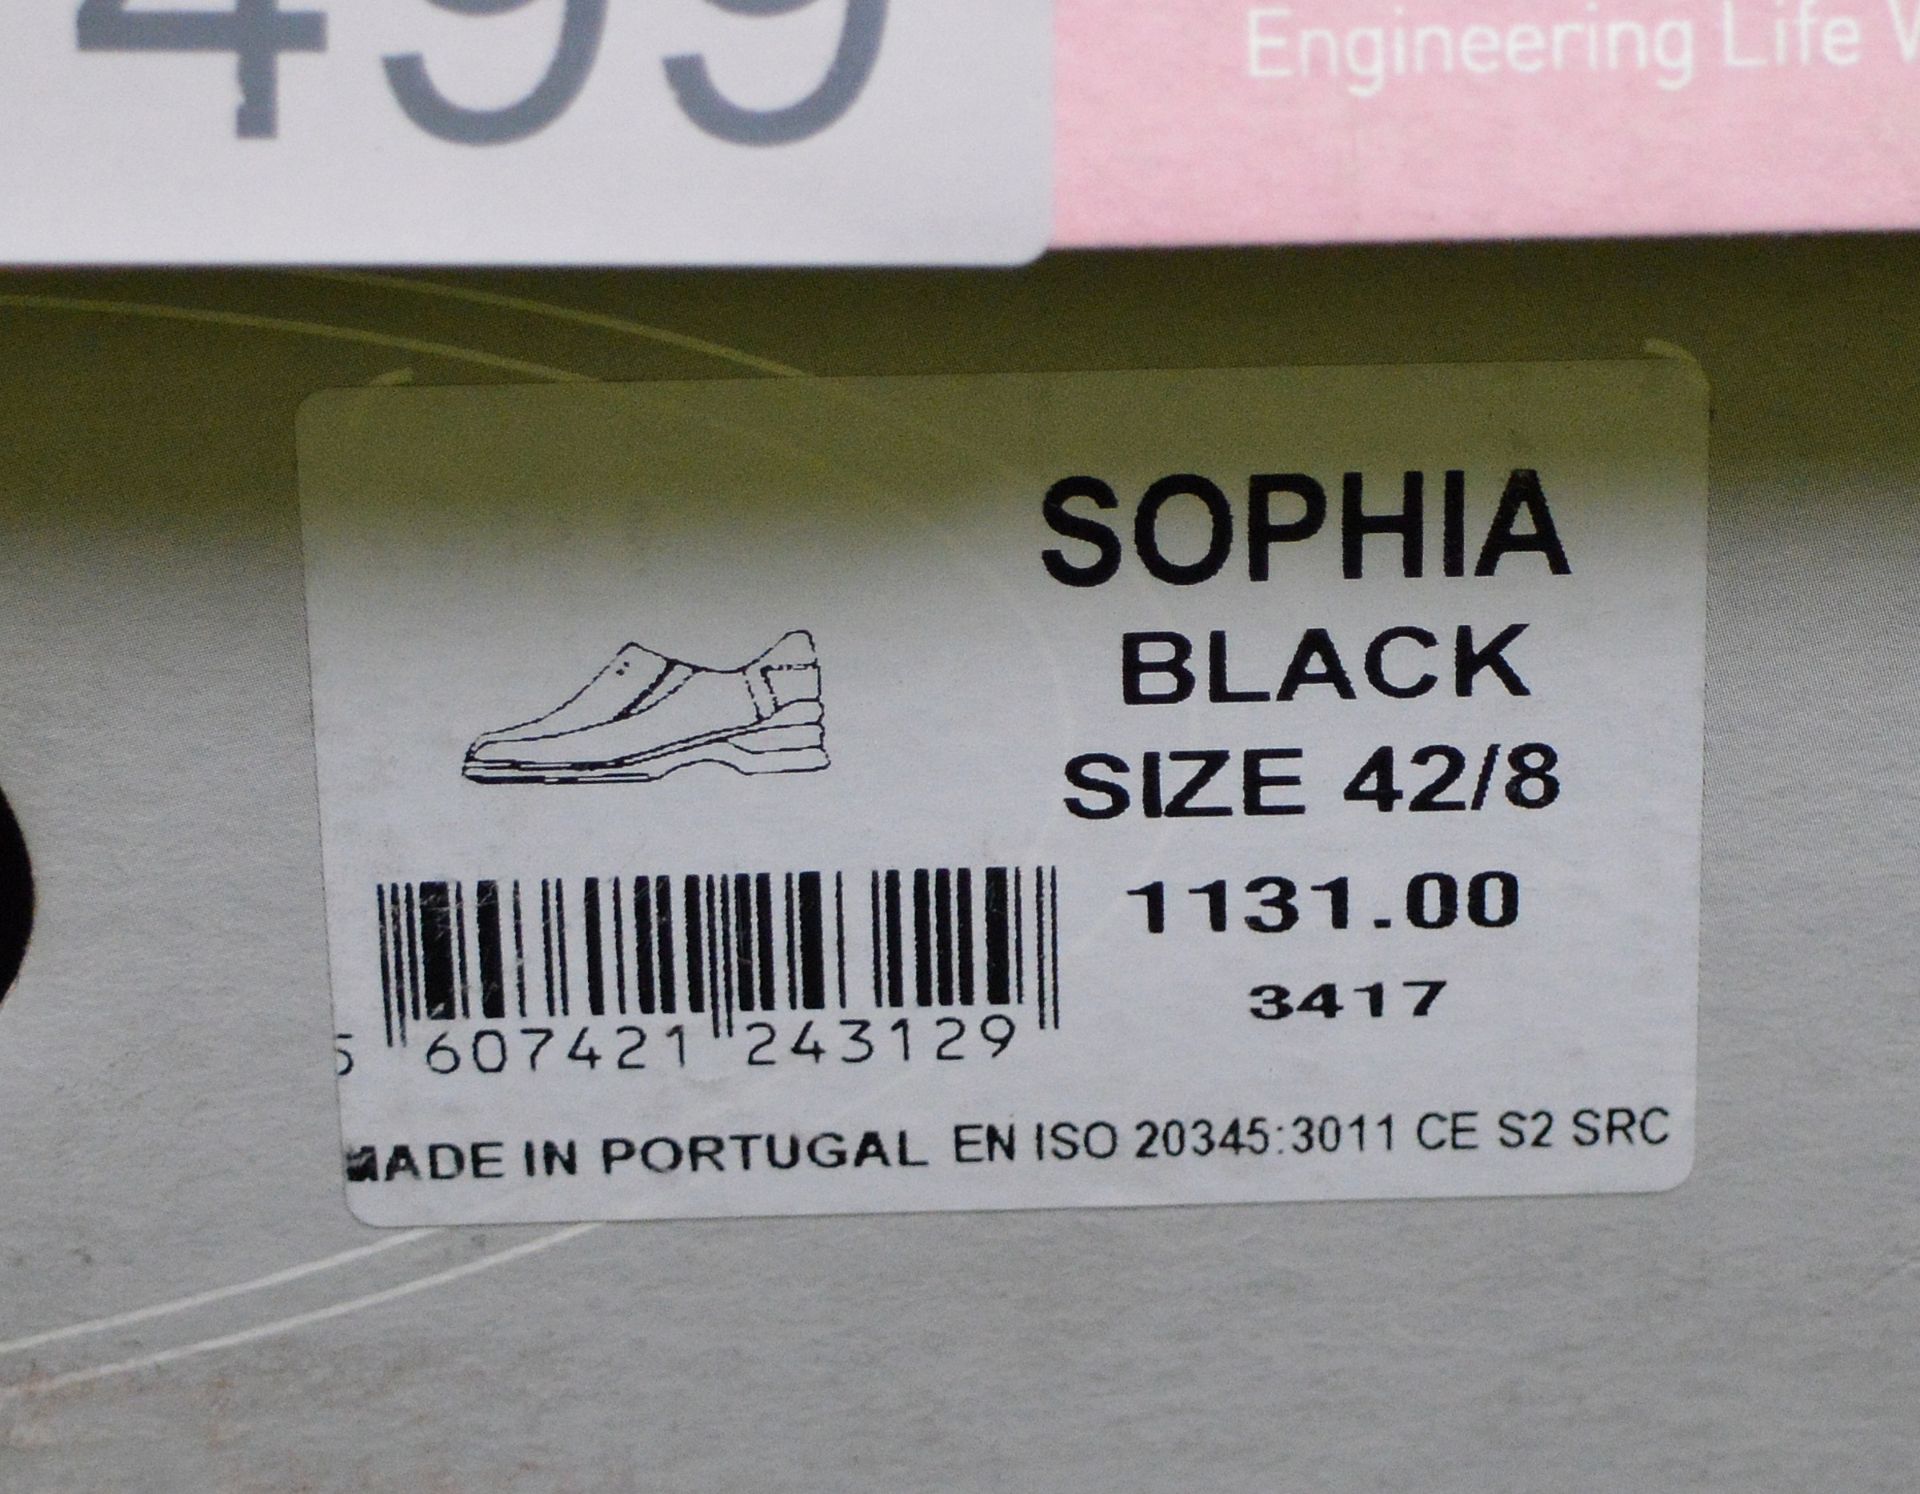 Lavoro womens safety shoes - see pictures for types & size - Image 2 of 2